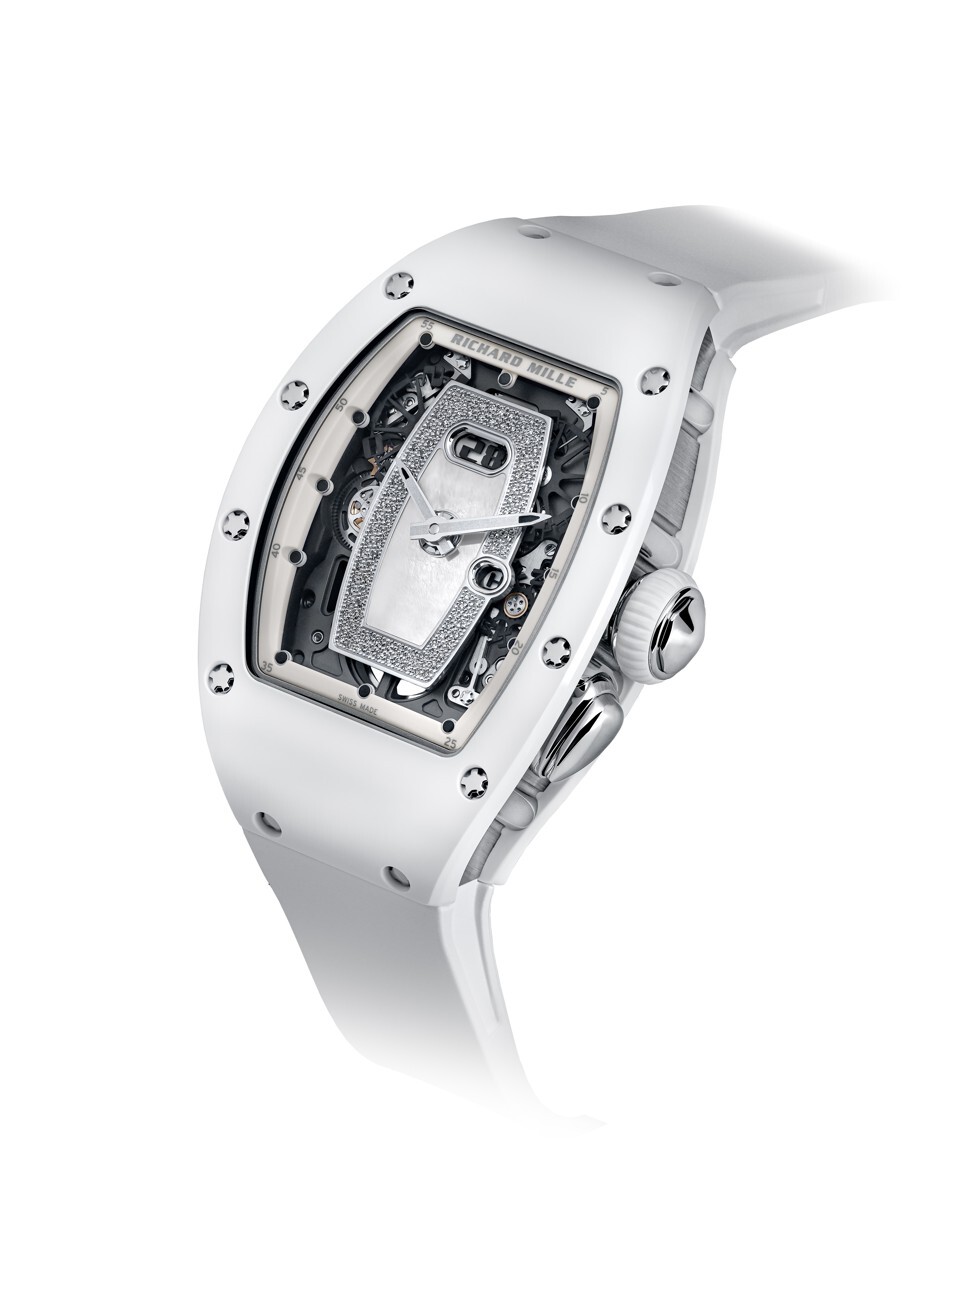 The new RM 037 features a dial embellished with diamonds and mother-of-pearl. Photo: Richard Mille